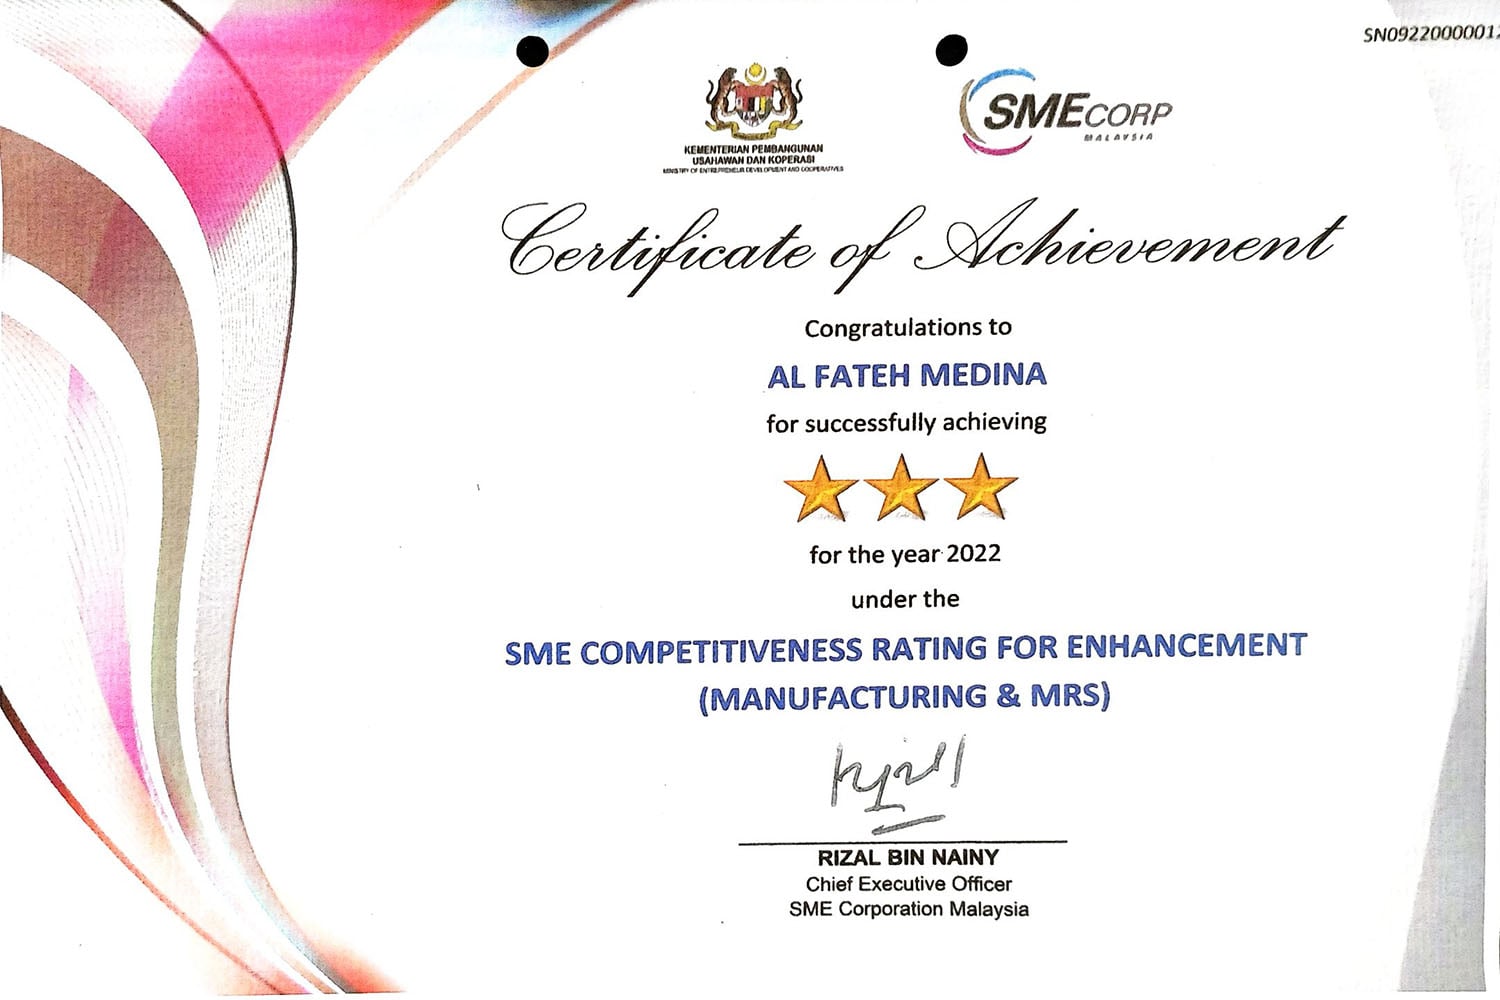 3 STAR SME COMPETITIVENESS FOR ENHANCEMENT (MANUFACTURING & MRS)